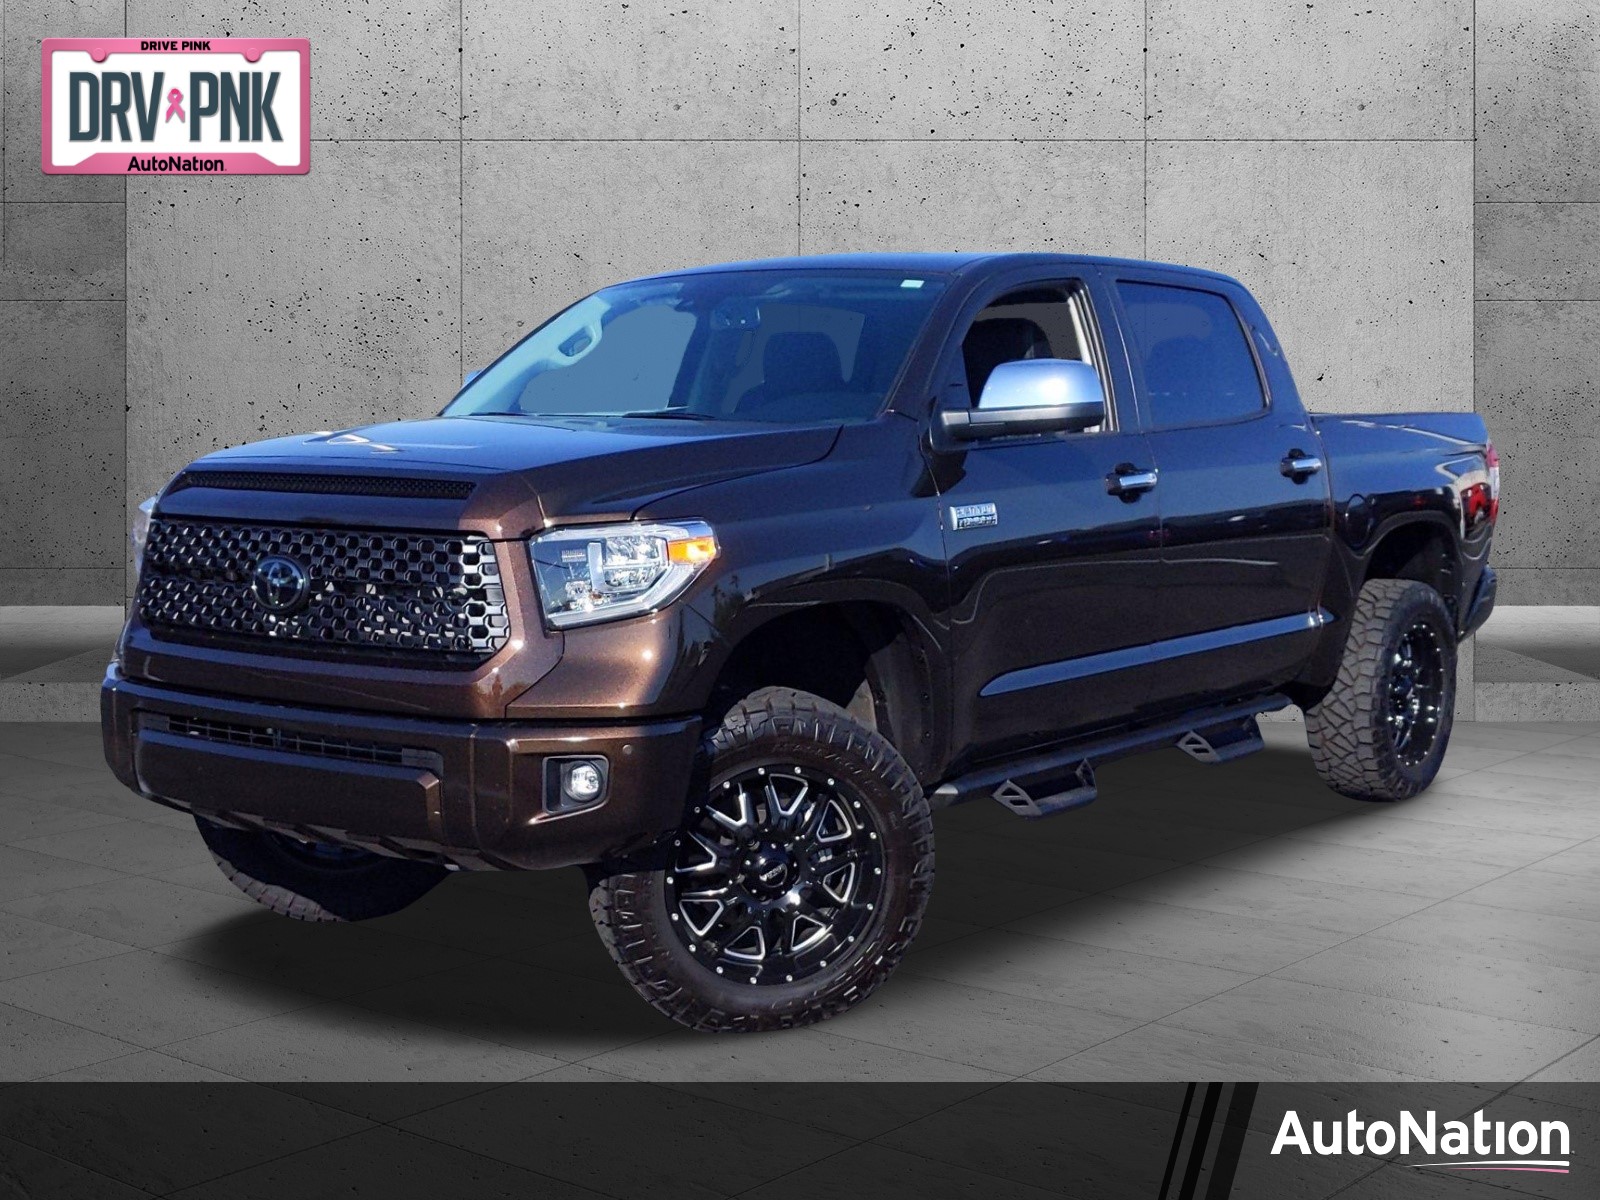 2021 toyota tundra double cab configurations - alphonso-stemple